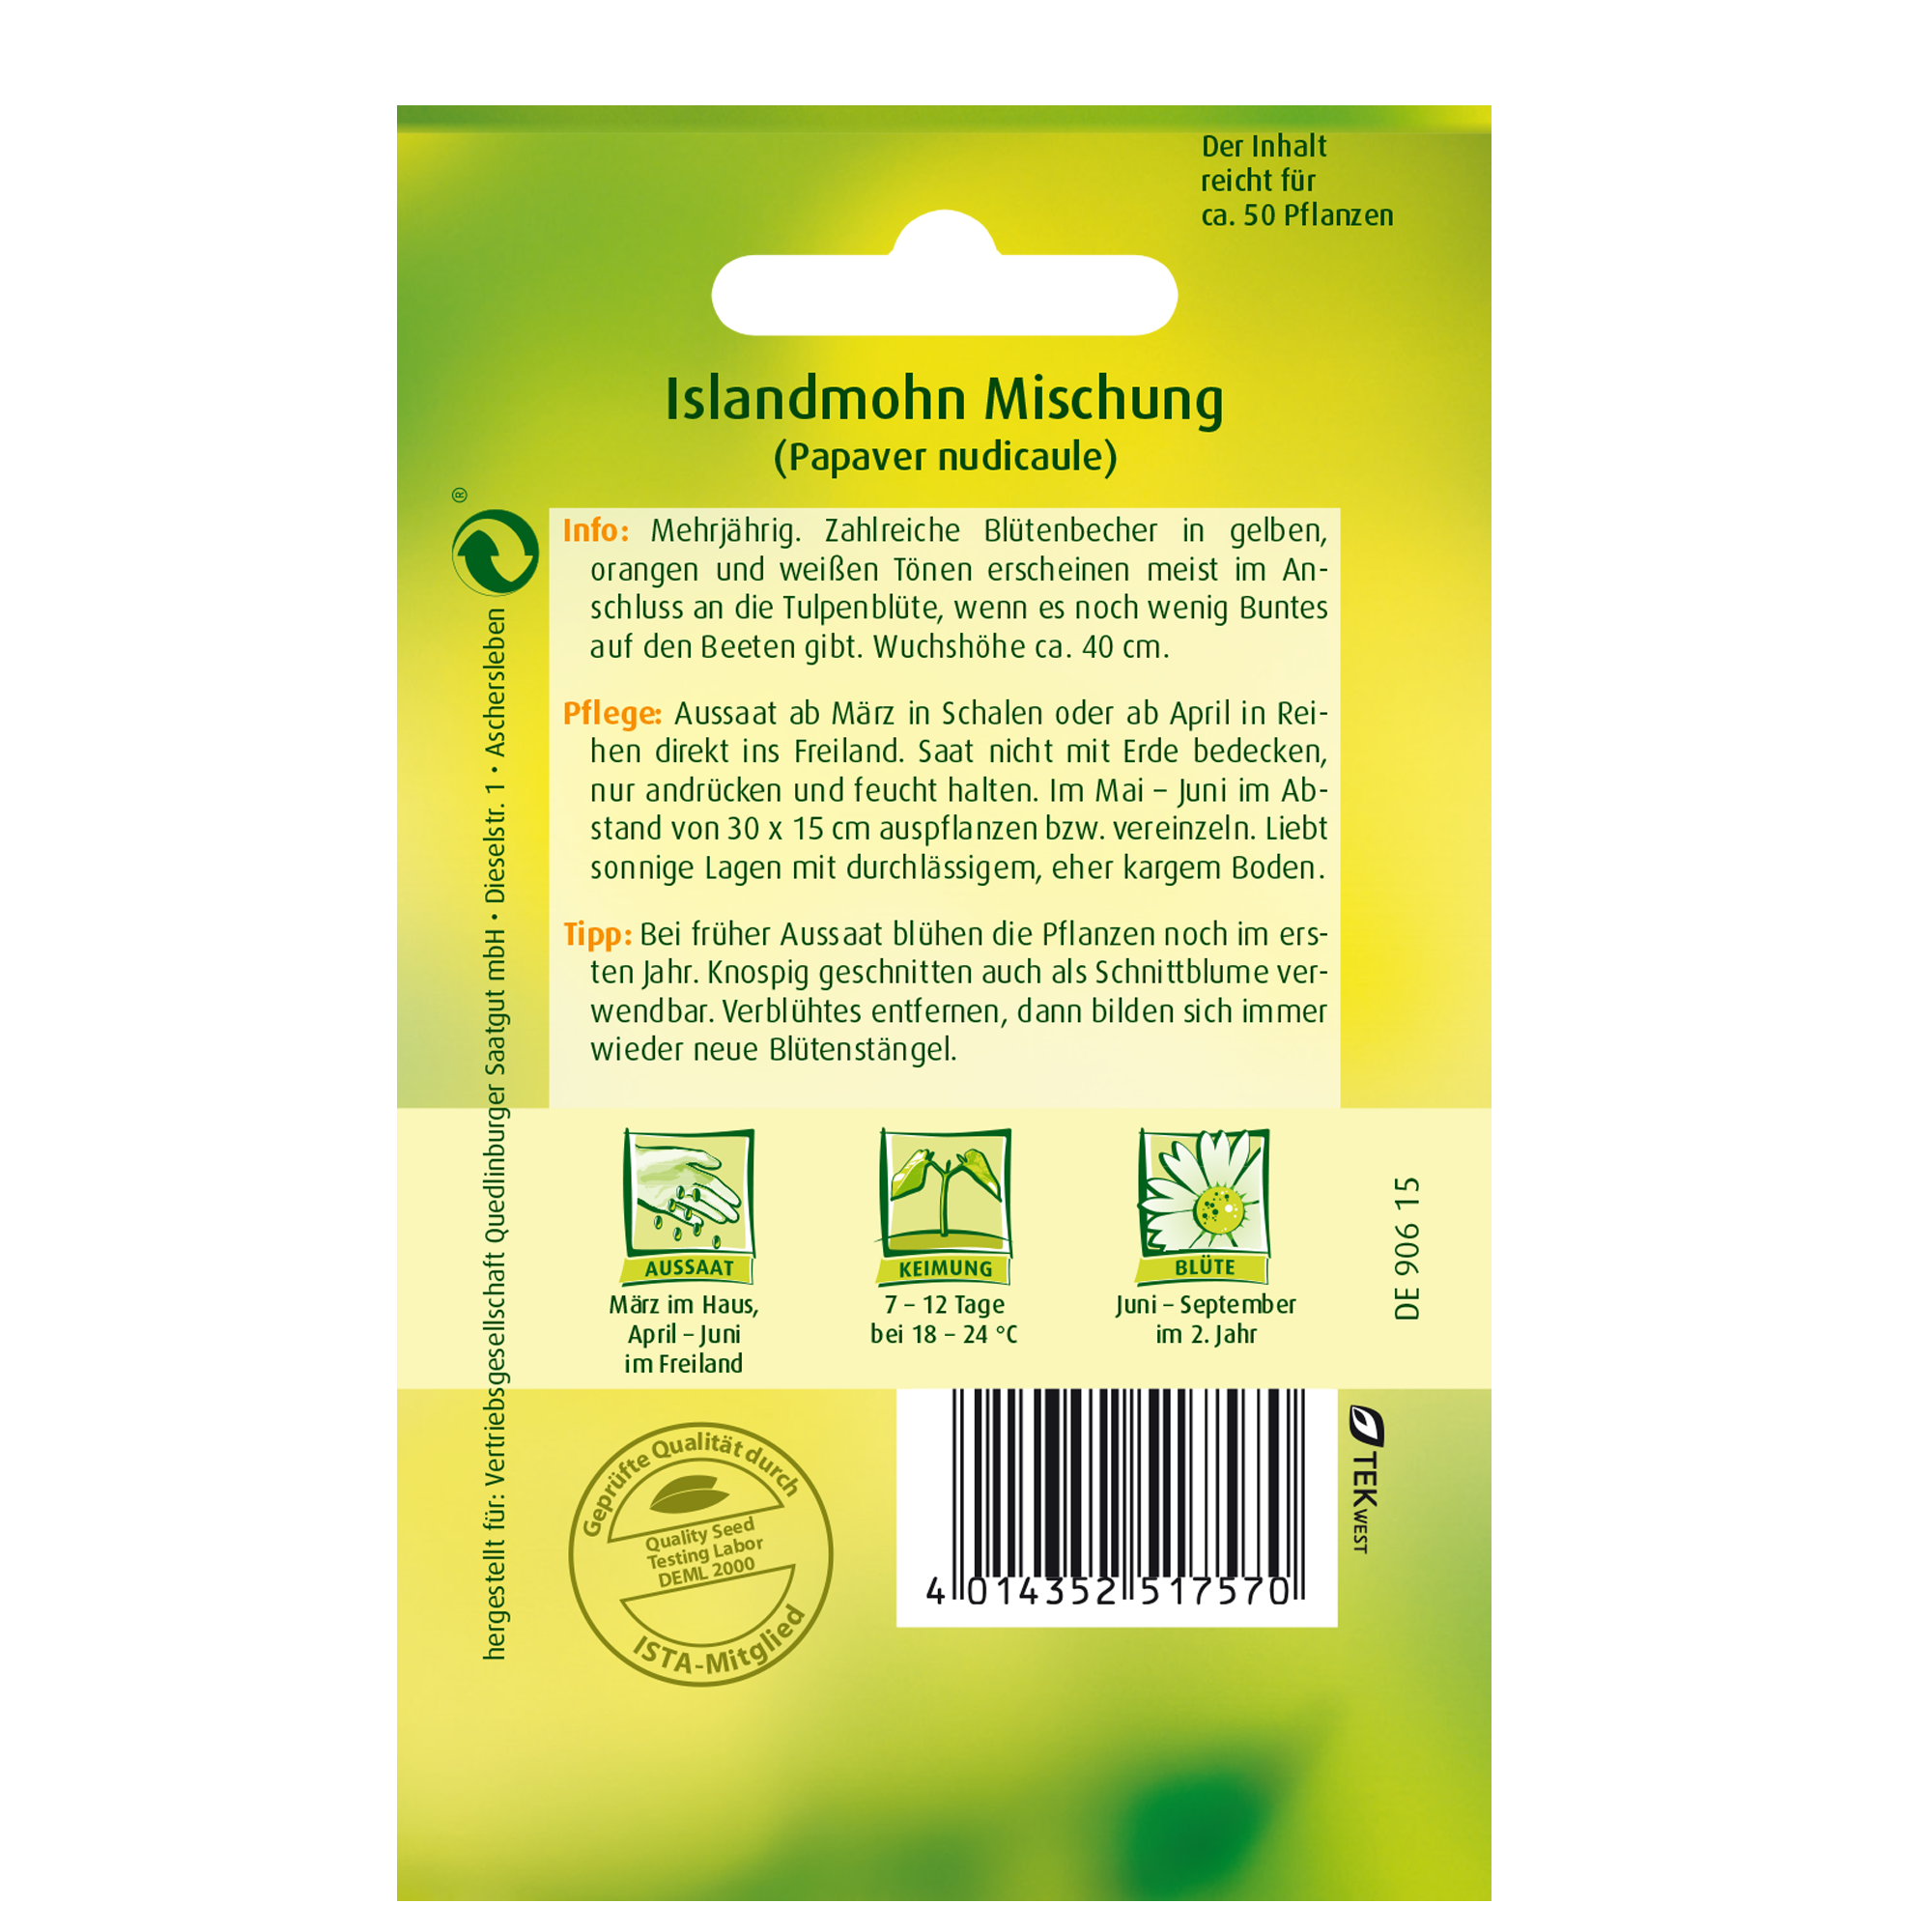 Islandmohn Mischung + product picture